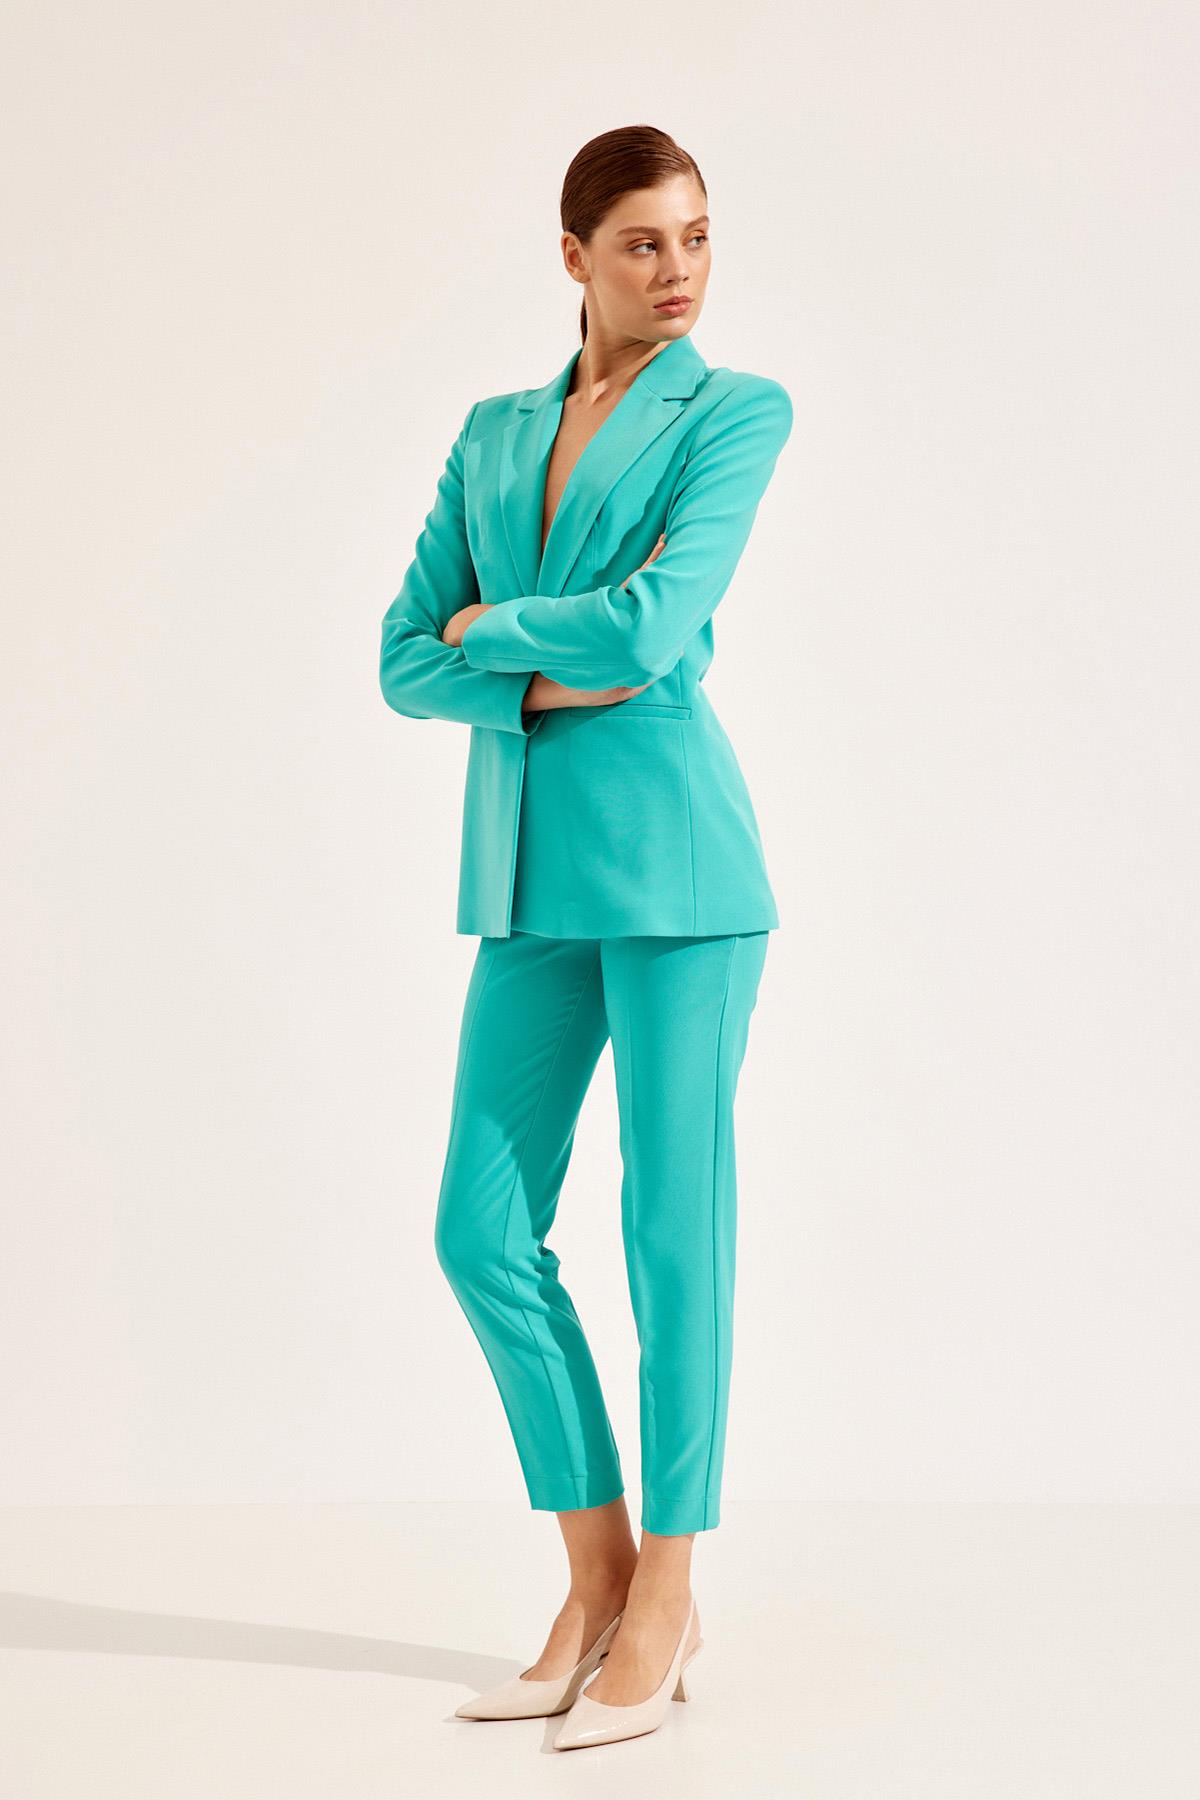 TURQUOİSE SUIT WITH TROUSERS 1YU2CTA0324(CK0486 